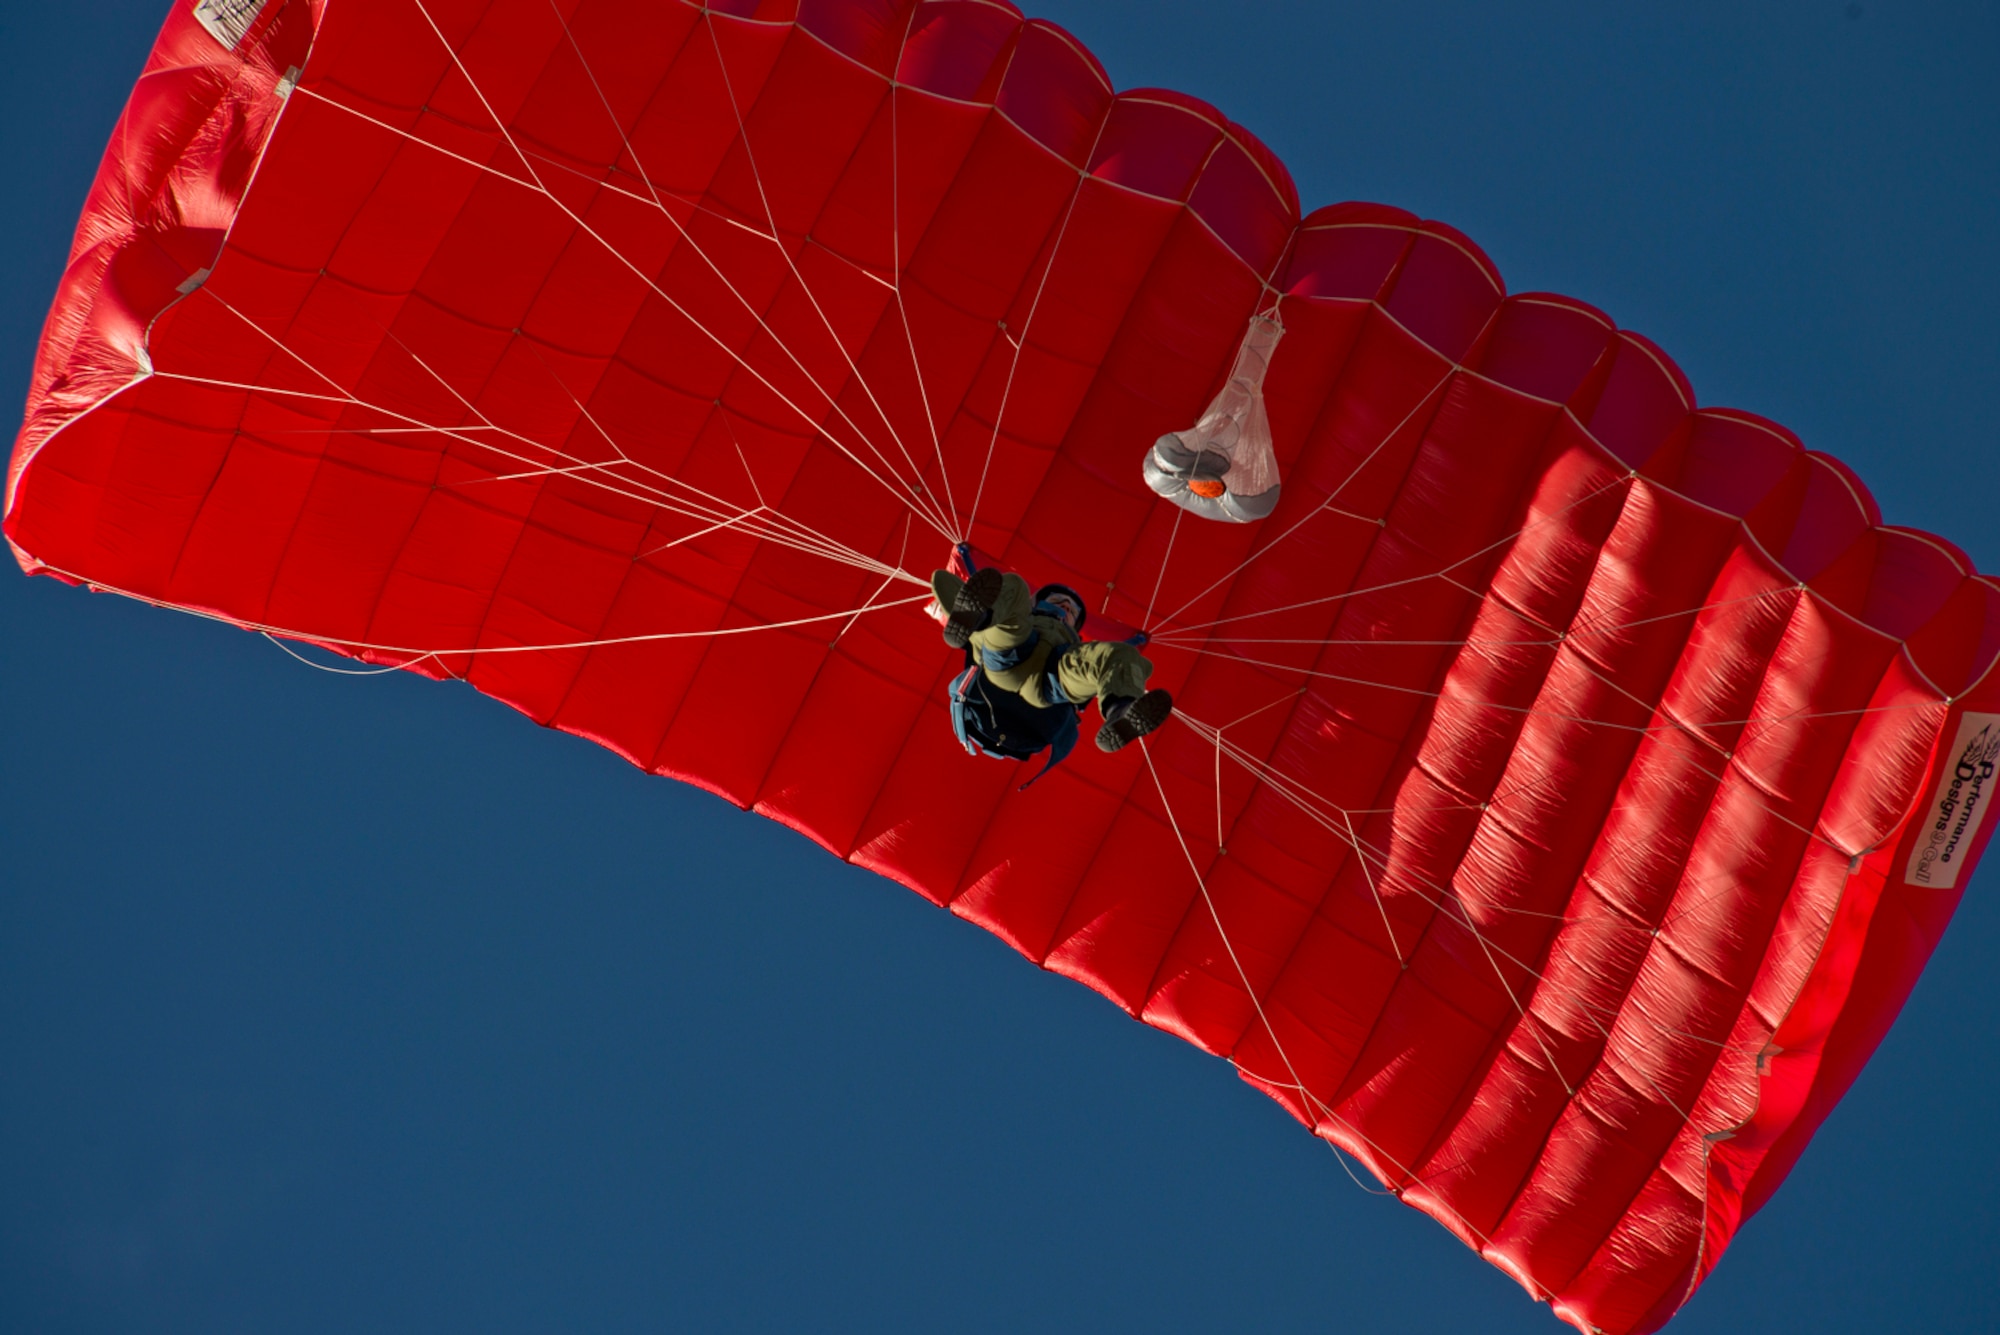 A U.S. Air Force Cadet prepares to land his initial parachute jump. Students are identified on their qualifying jumps by the red parachute canopies. (U.S. Air Force photo/Tech. Sgt. Bennie J. Davis III)